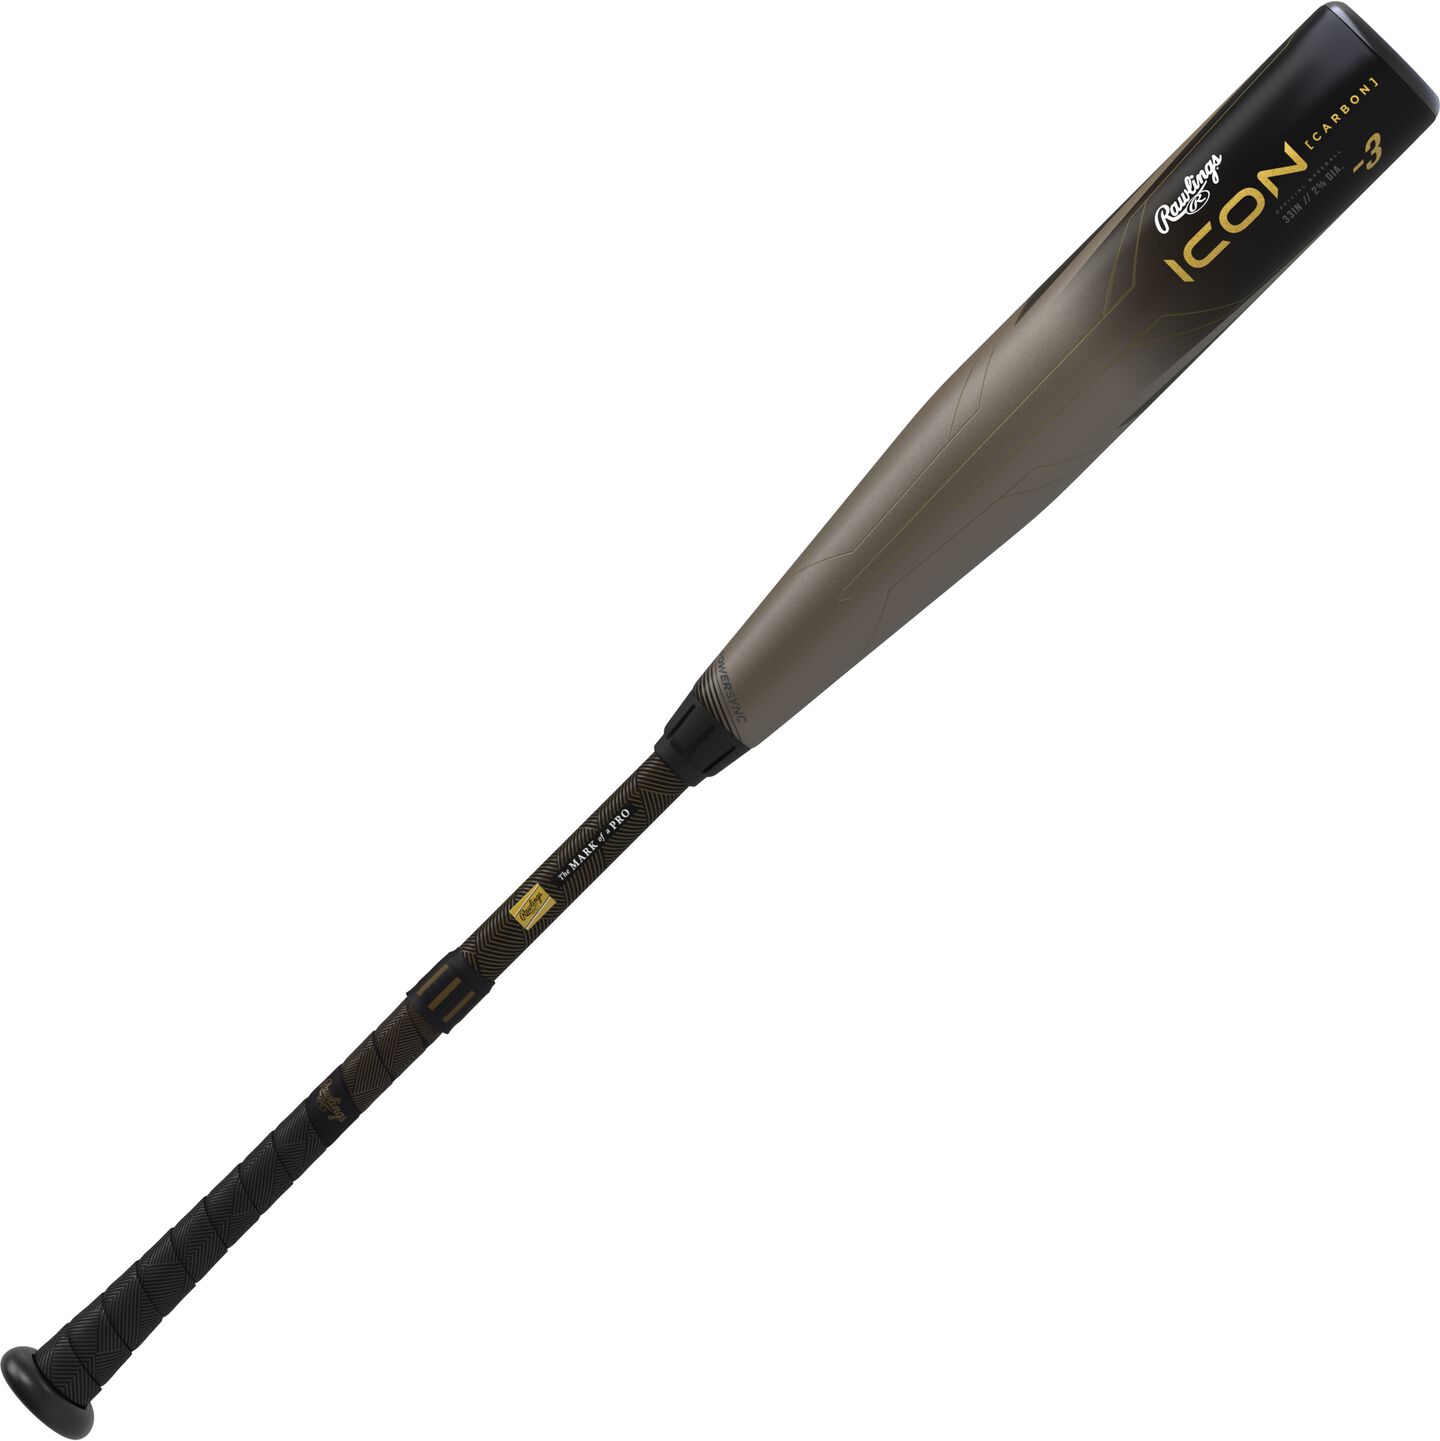 https://www.rawlings.com/dw/image/v2/BBBJ_PRD/on/demandware.static/-/Sites-rawlings-consolidated-Library/default/dwd73c7b70/images/comparison/rawlings-bats/RBB313-130.jpg?sw=1440&sfrm=png